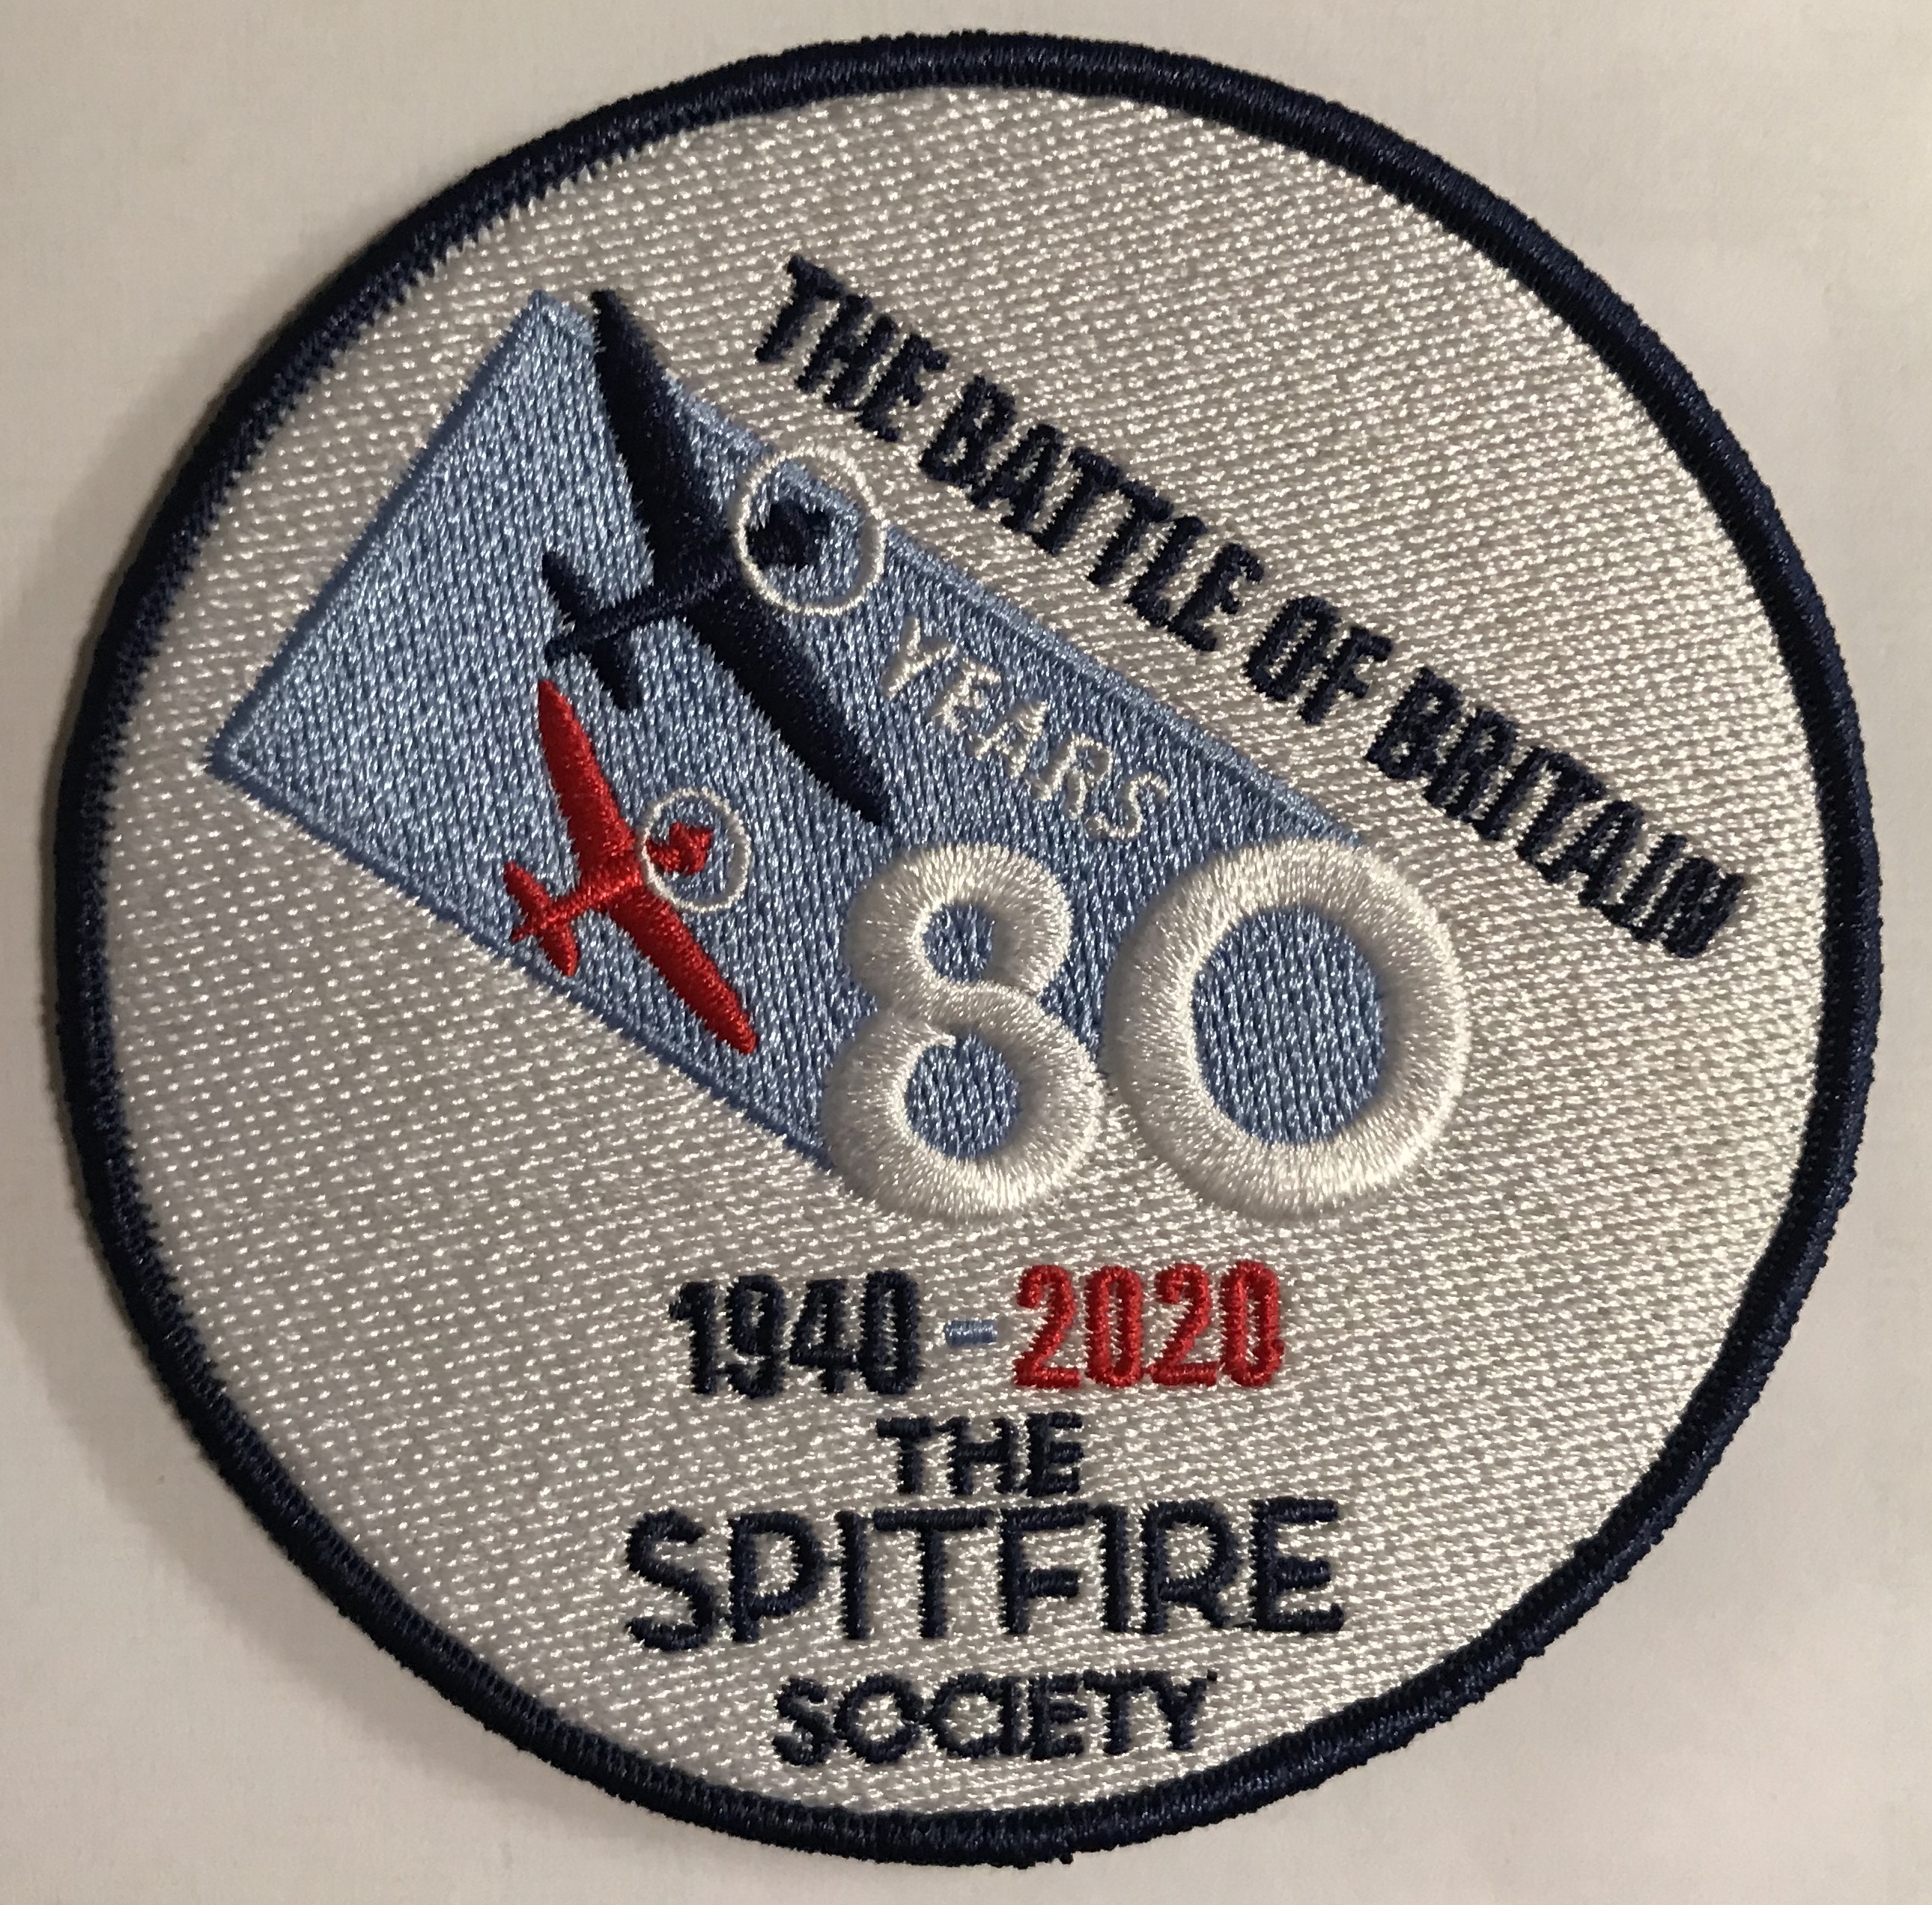 The Battle of Britain 80th Anniversary fabric badge patch